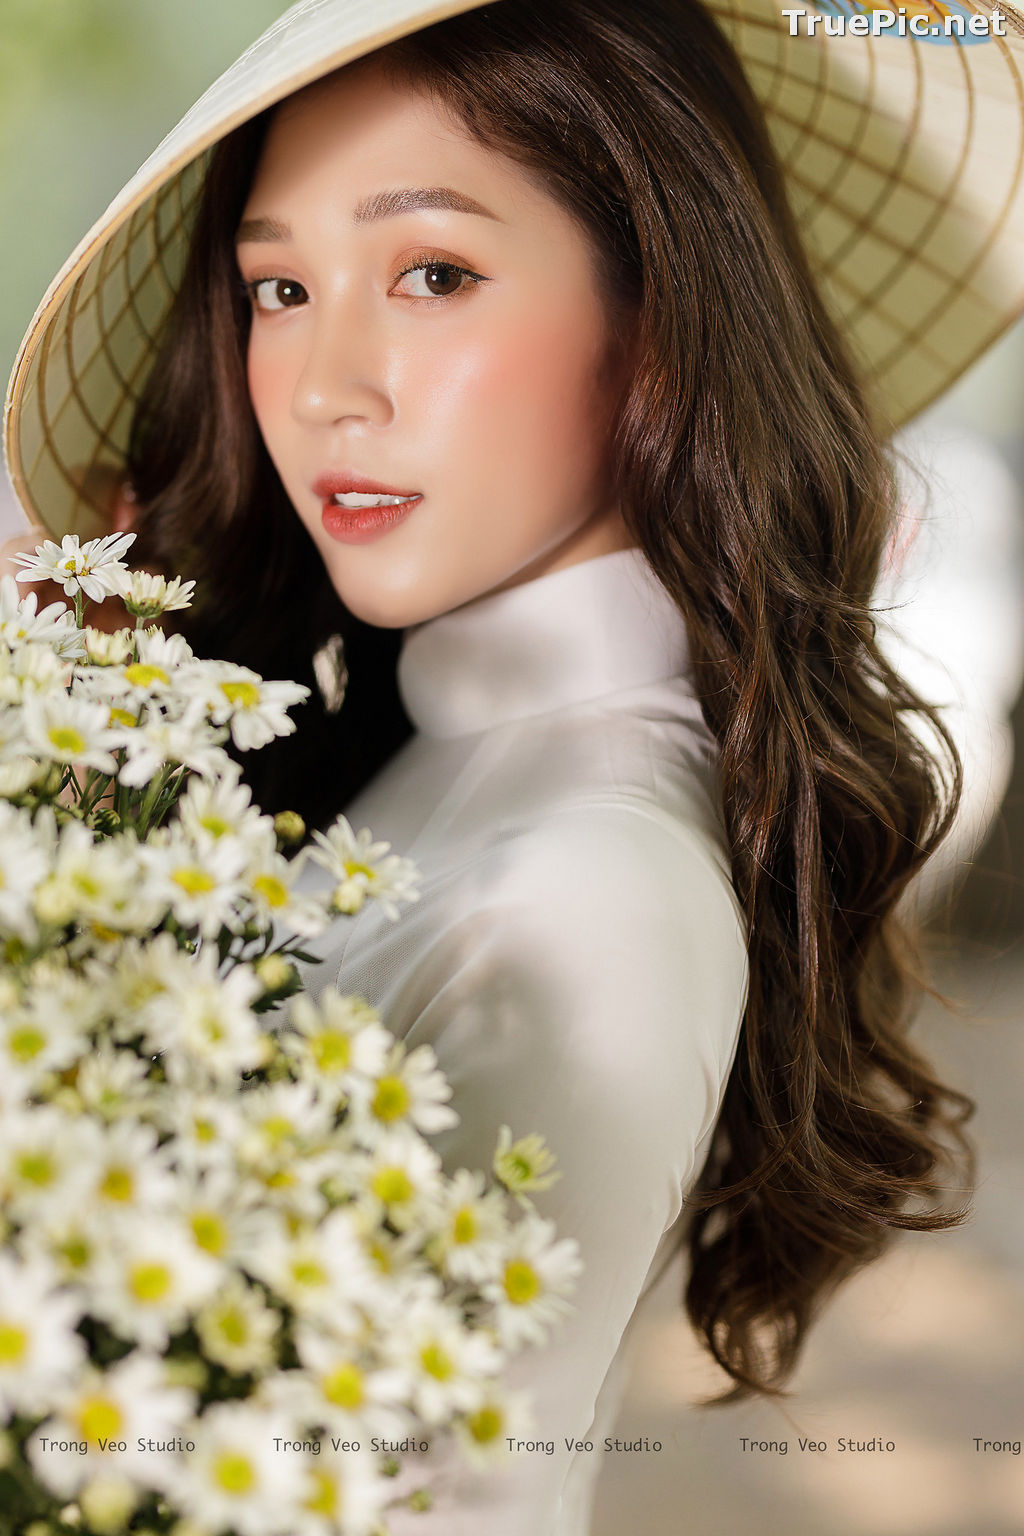 Image The Beauty of Vietnamese Girls with Traditional Dress (Ao Dai) #1 - TruePic.net - Picture-32